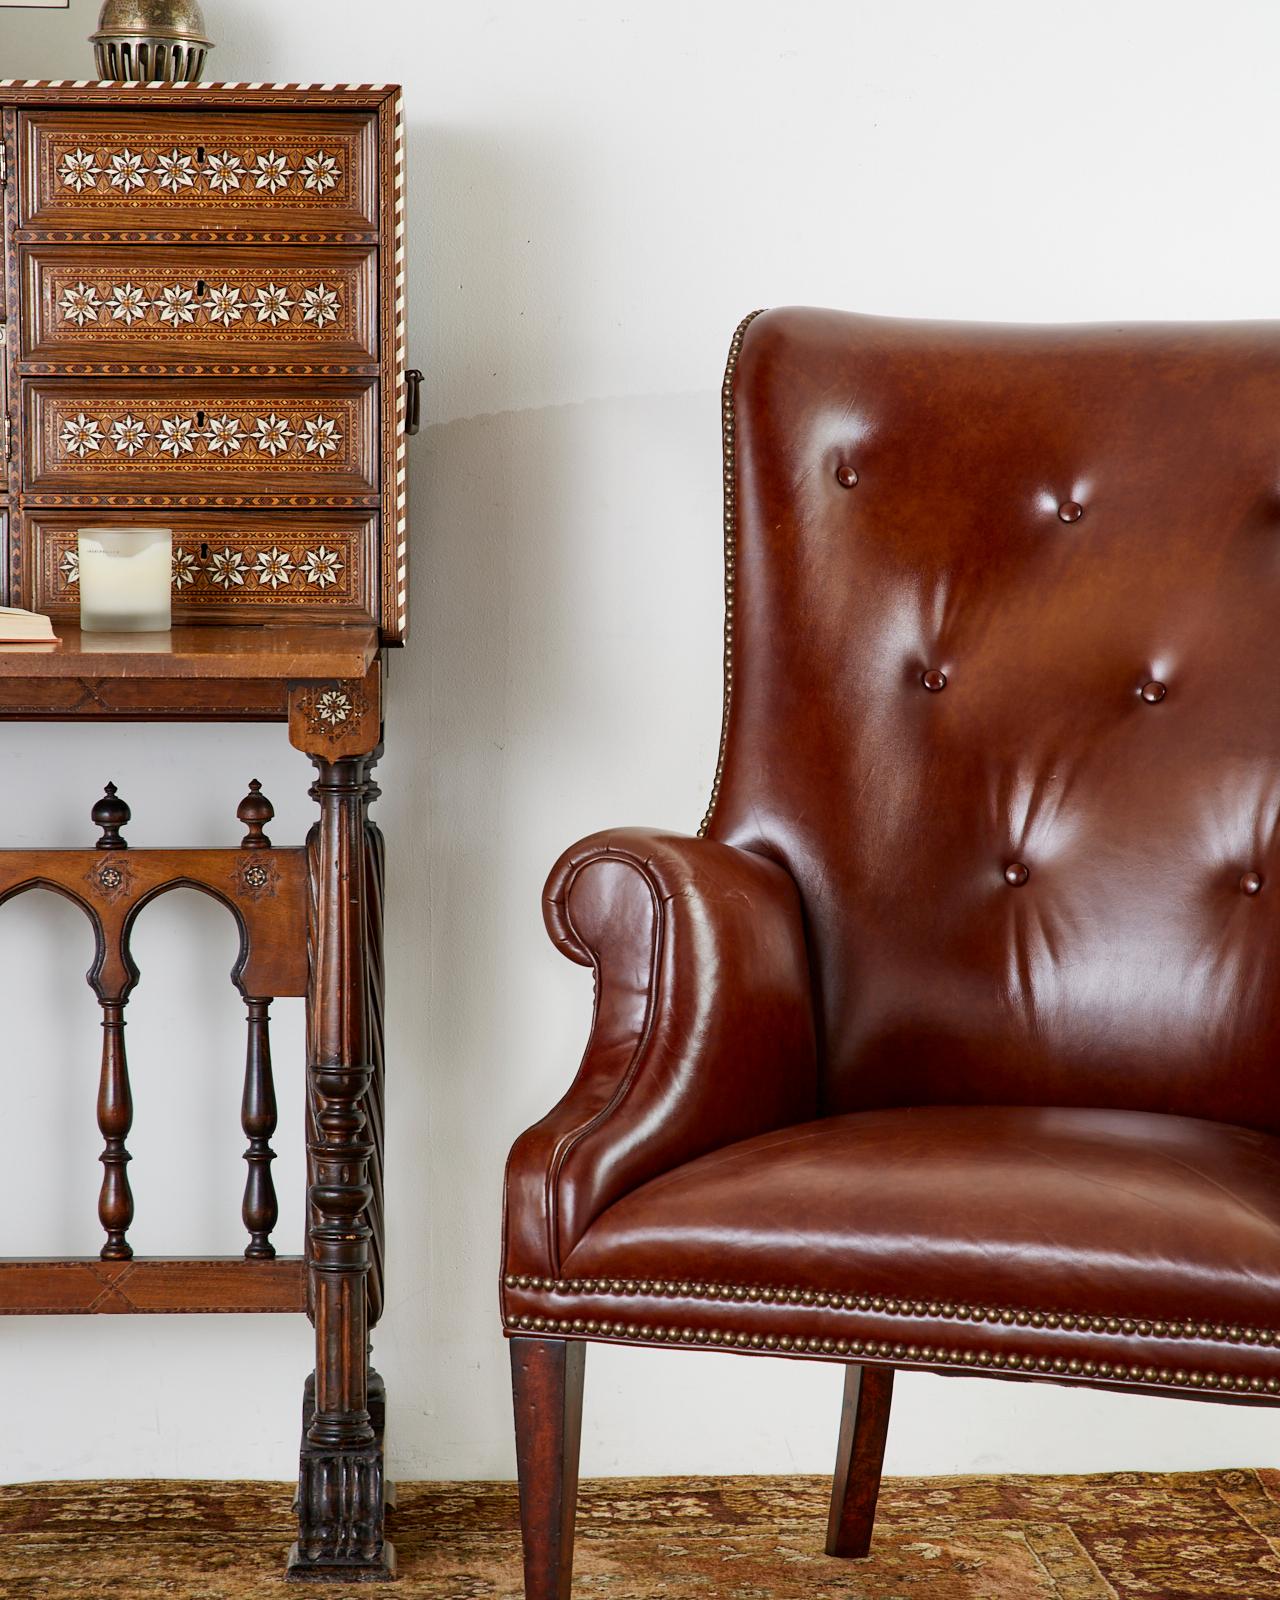 Stylish leather library chair or wingback chair made in the English Georgian taste. Features a supple cognac leather with a tufted back. The chair has Classic rolled arms and is accented by brass tack nailheads on the borders. The hardwood frame is